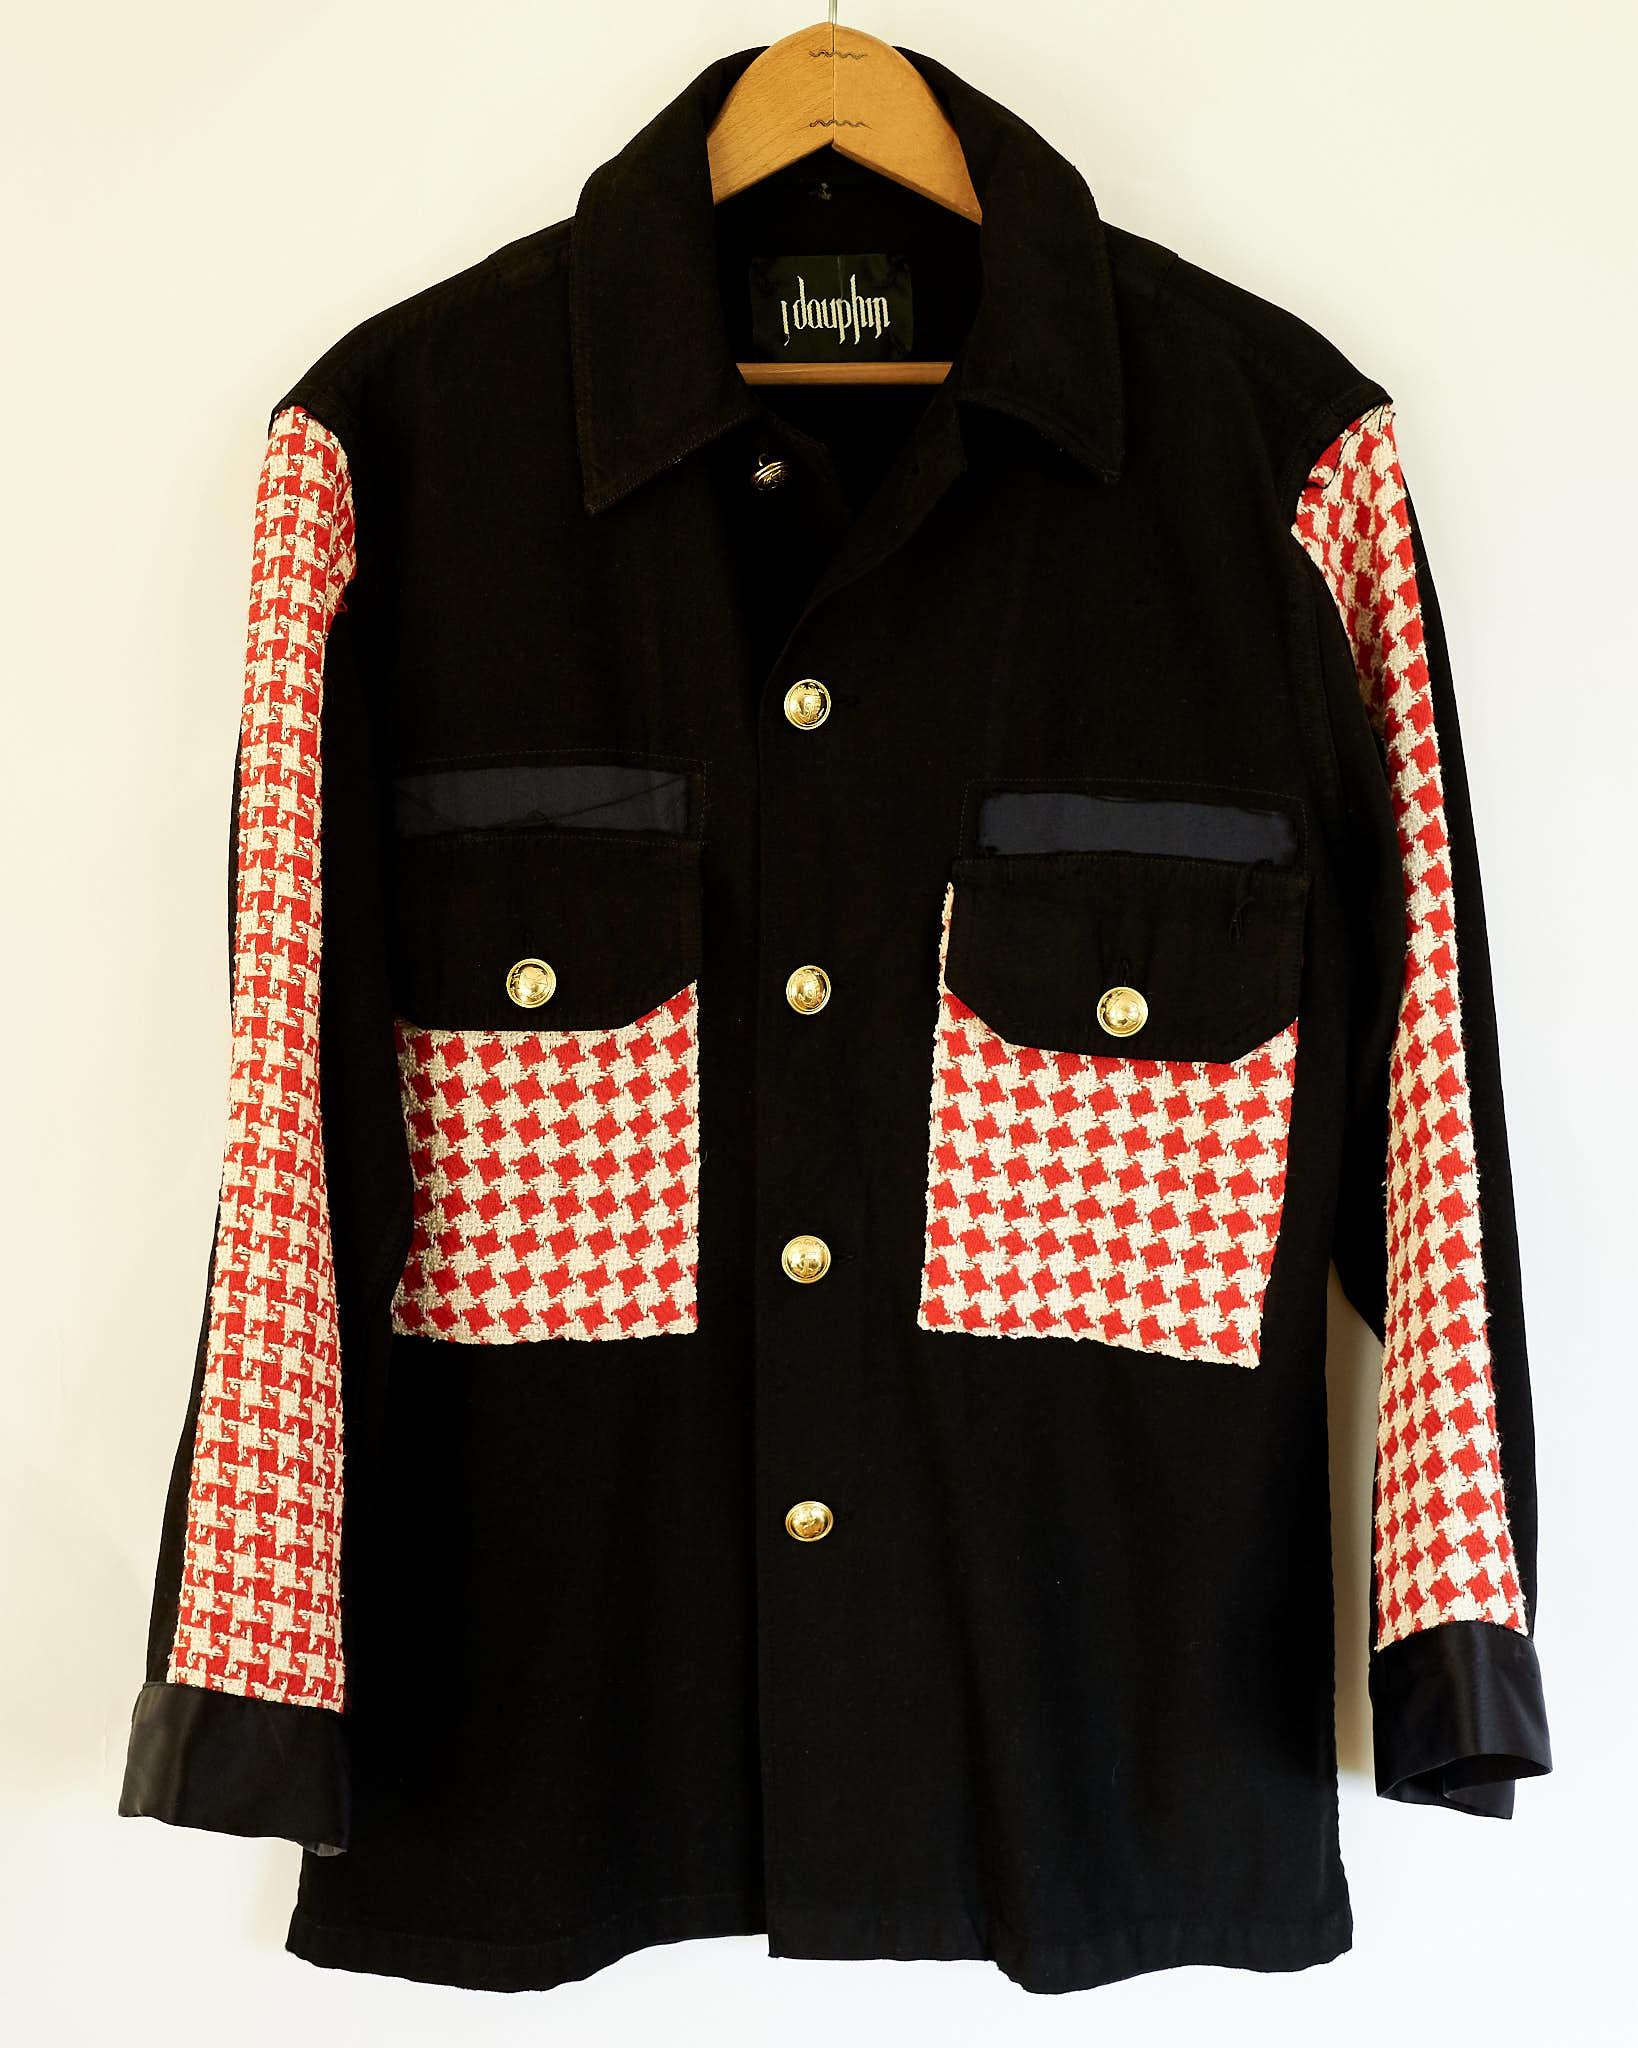 Black Jacket Original Designer Tweed White Red Gold Button Embellished J Dauphin

Brand: J Dauphin
Size: Medium
Sustainable Luxury, Up-cycled and Re-purposed Vintage

Our Up-cycled Vintage Jackets are made from vintage, natural fibers, military